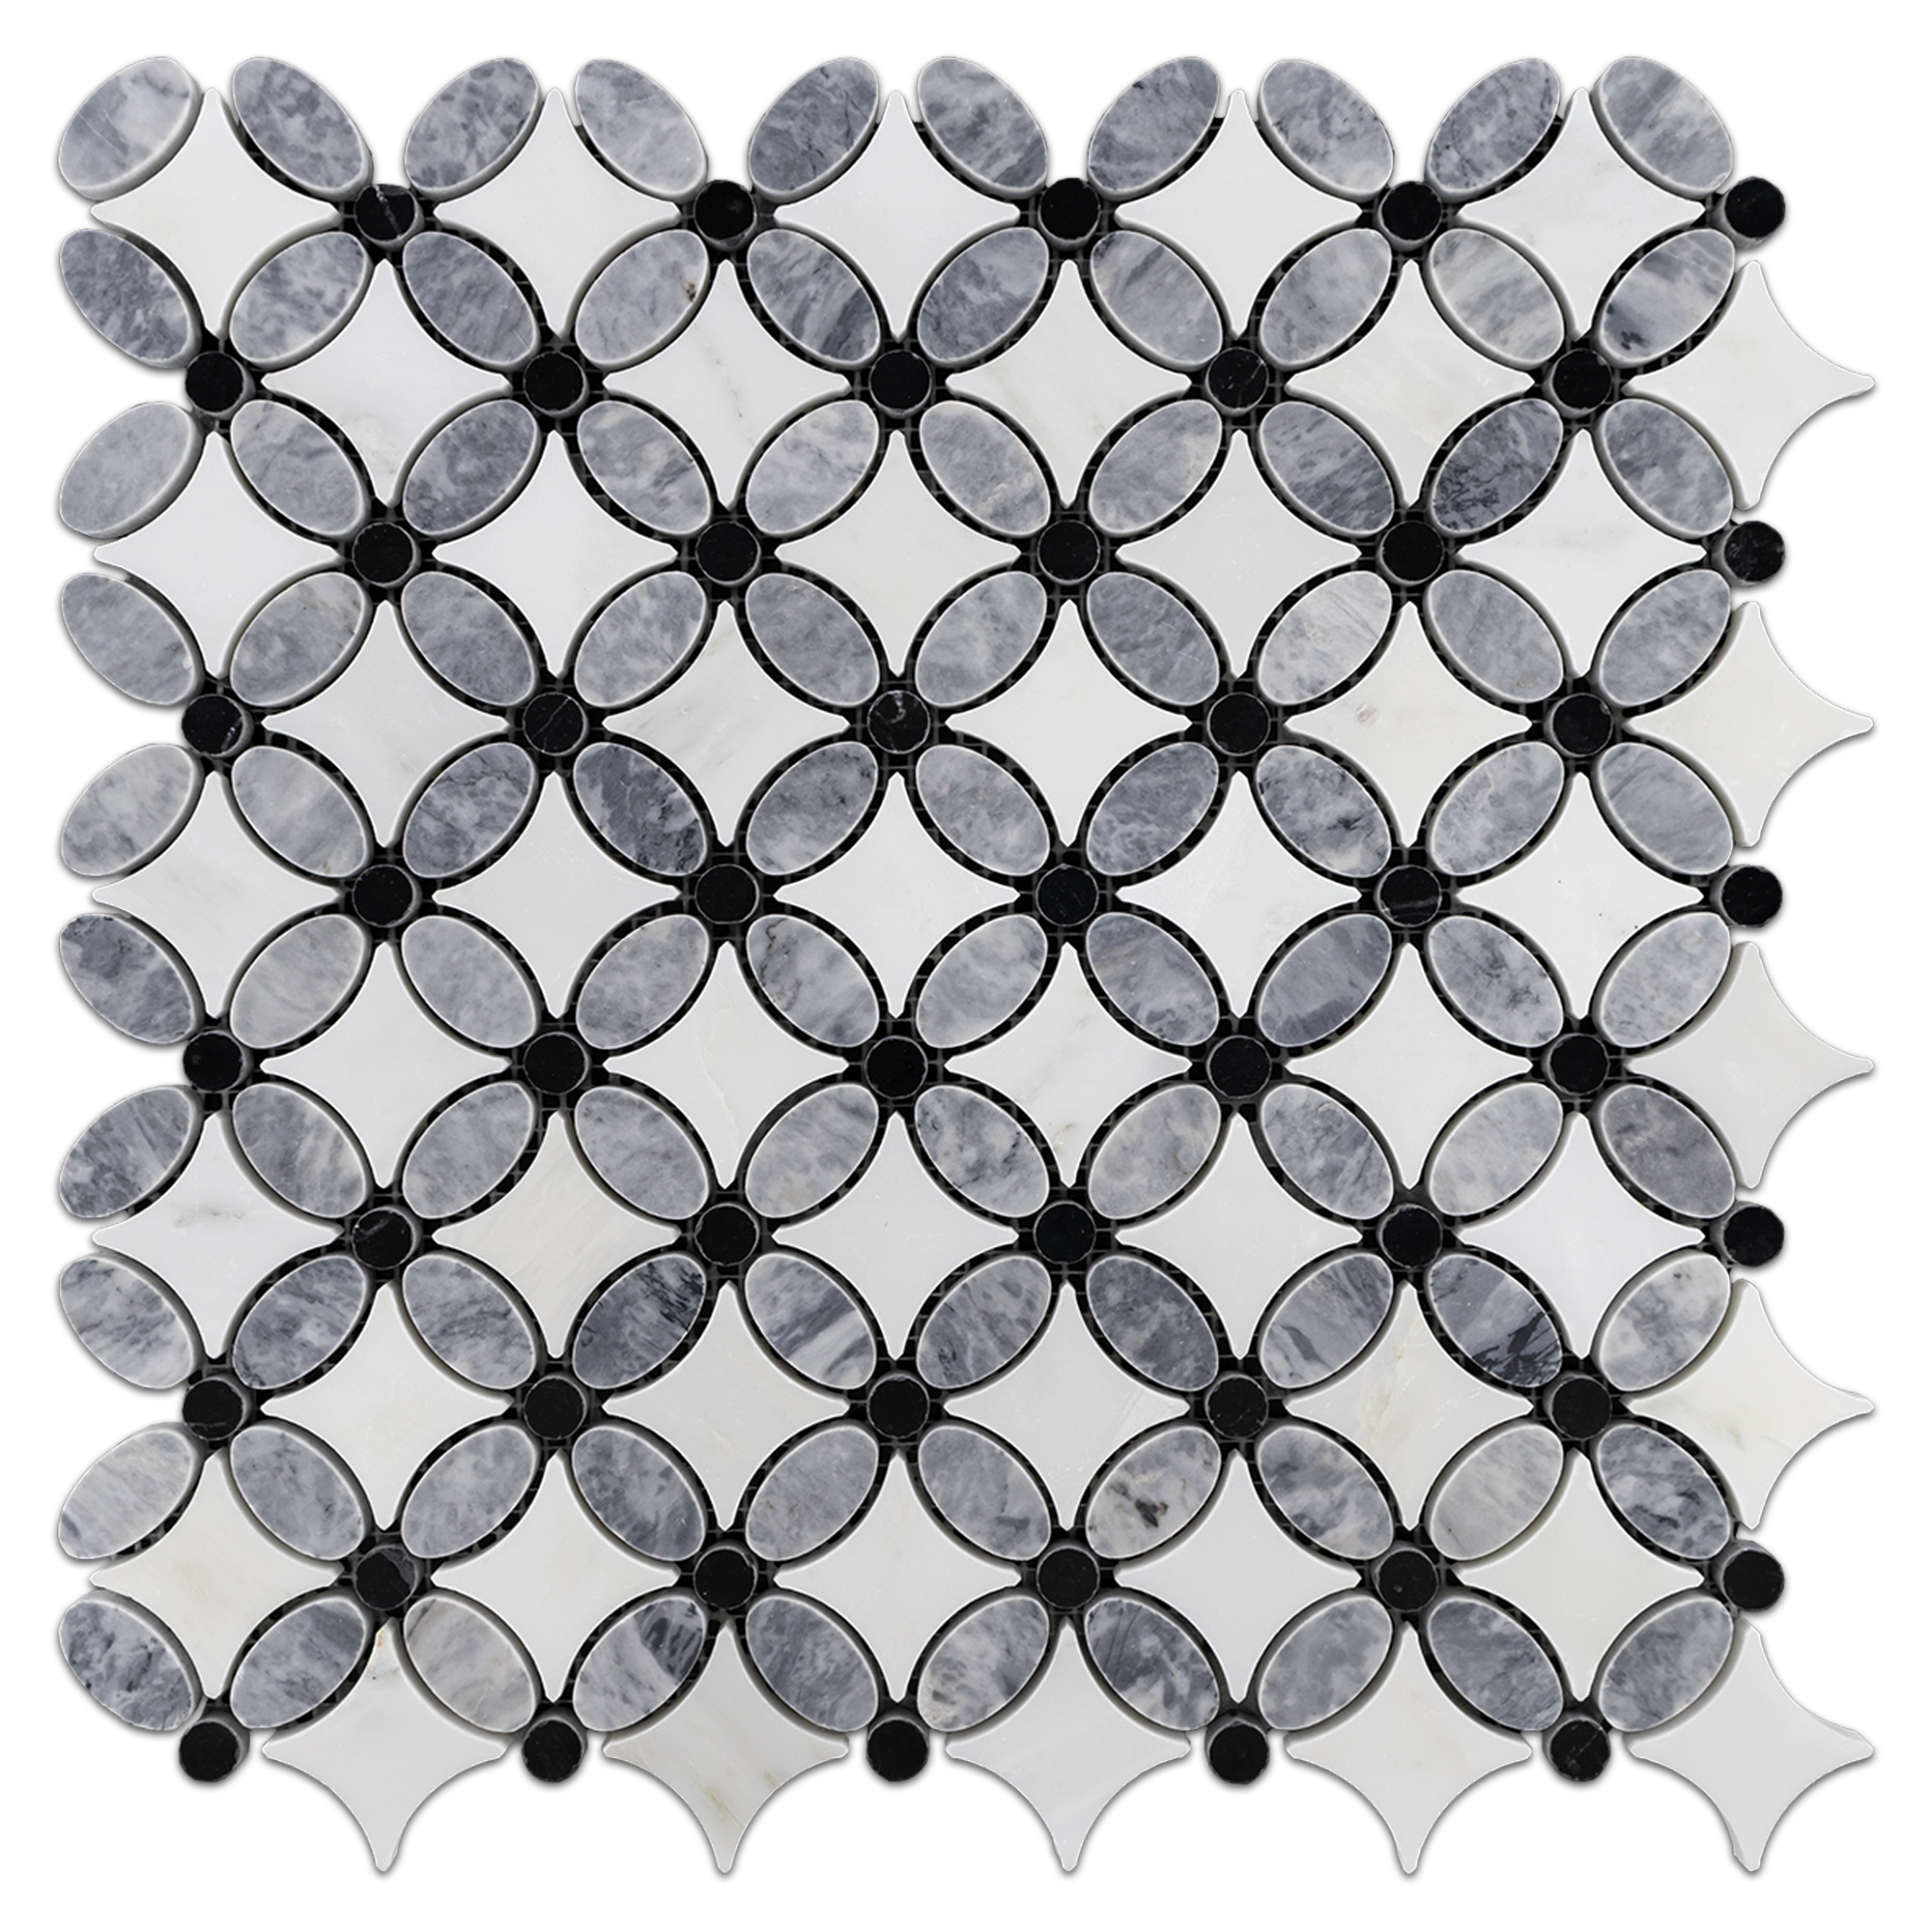 Elon Pacific Gray Pearl White Black Marble Fleur Field Mosaic Tile 13.125x13.125x0.375 Polished - Surface Group International Product